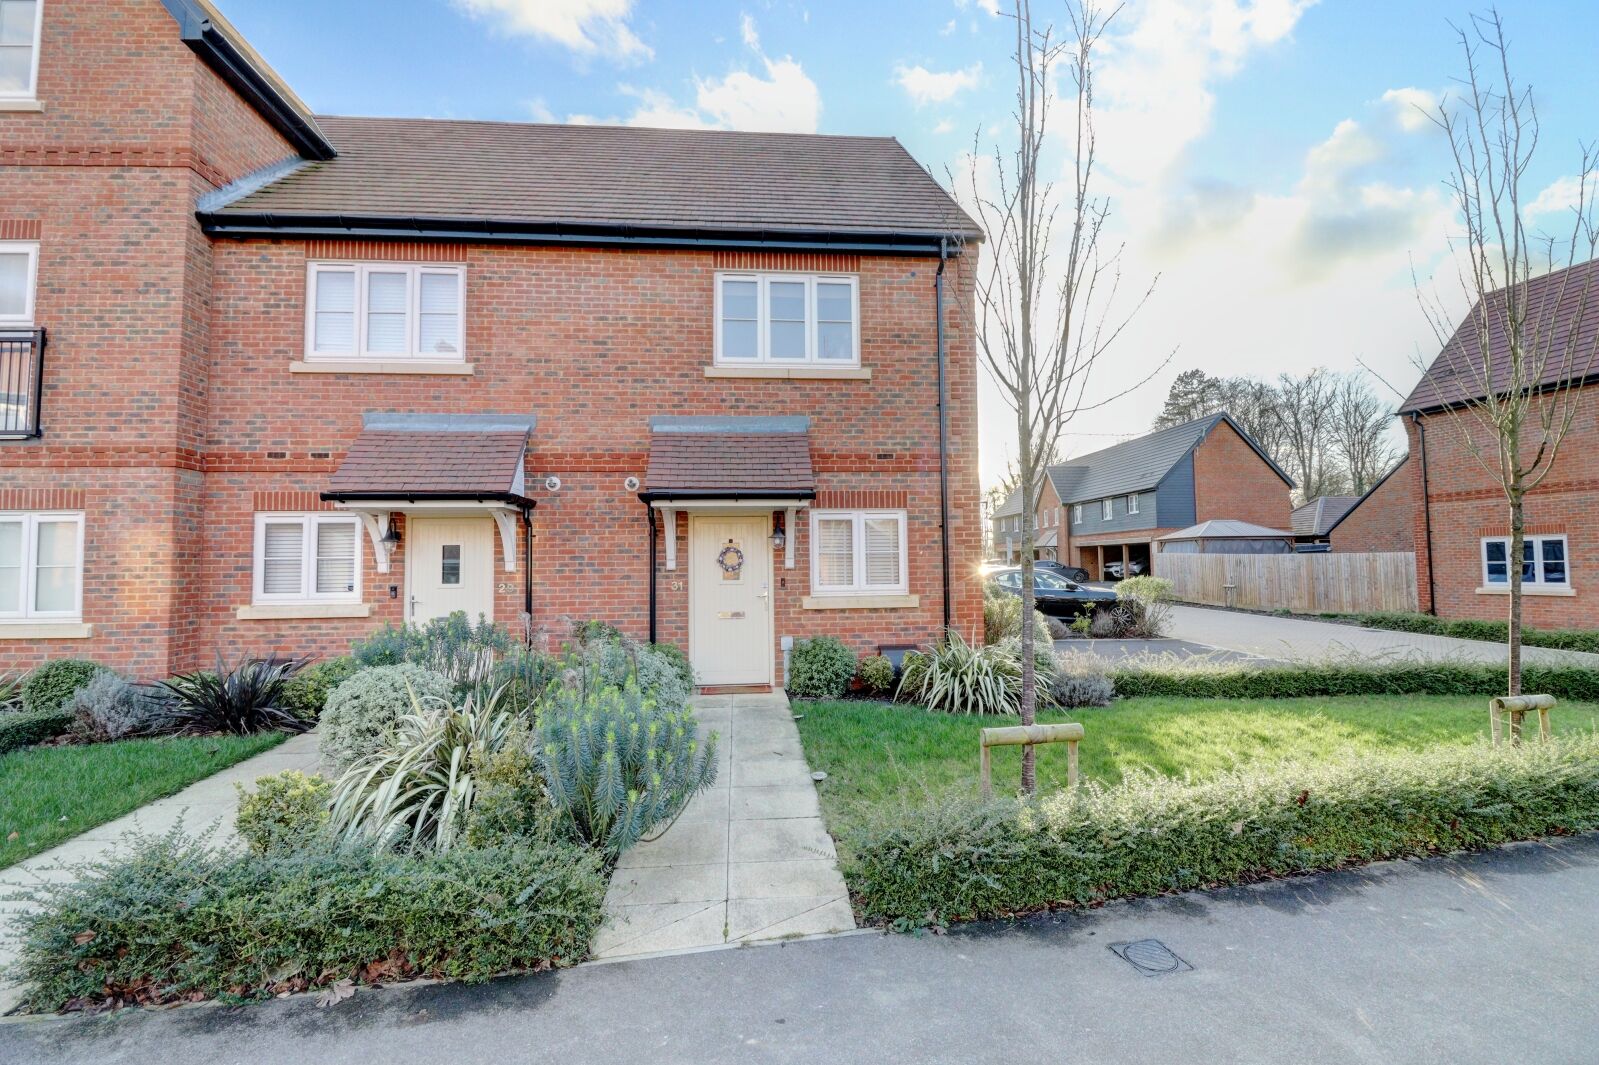 2 bedroom end terraced house for sale Aspen Road, High Wycombe, HP10, main image